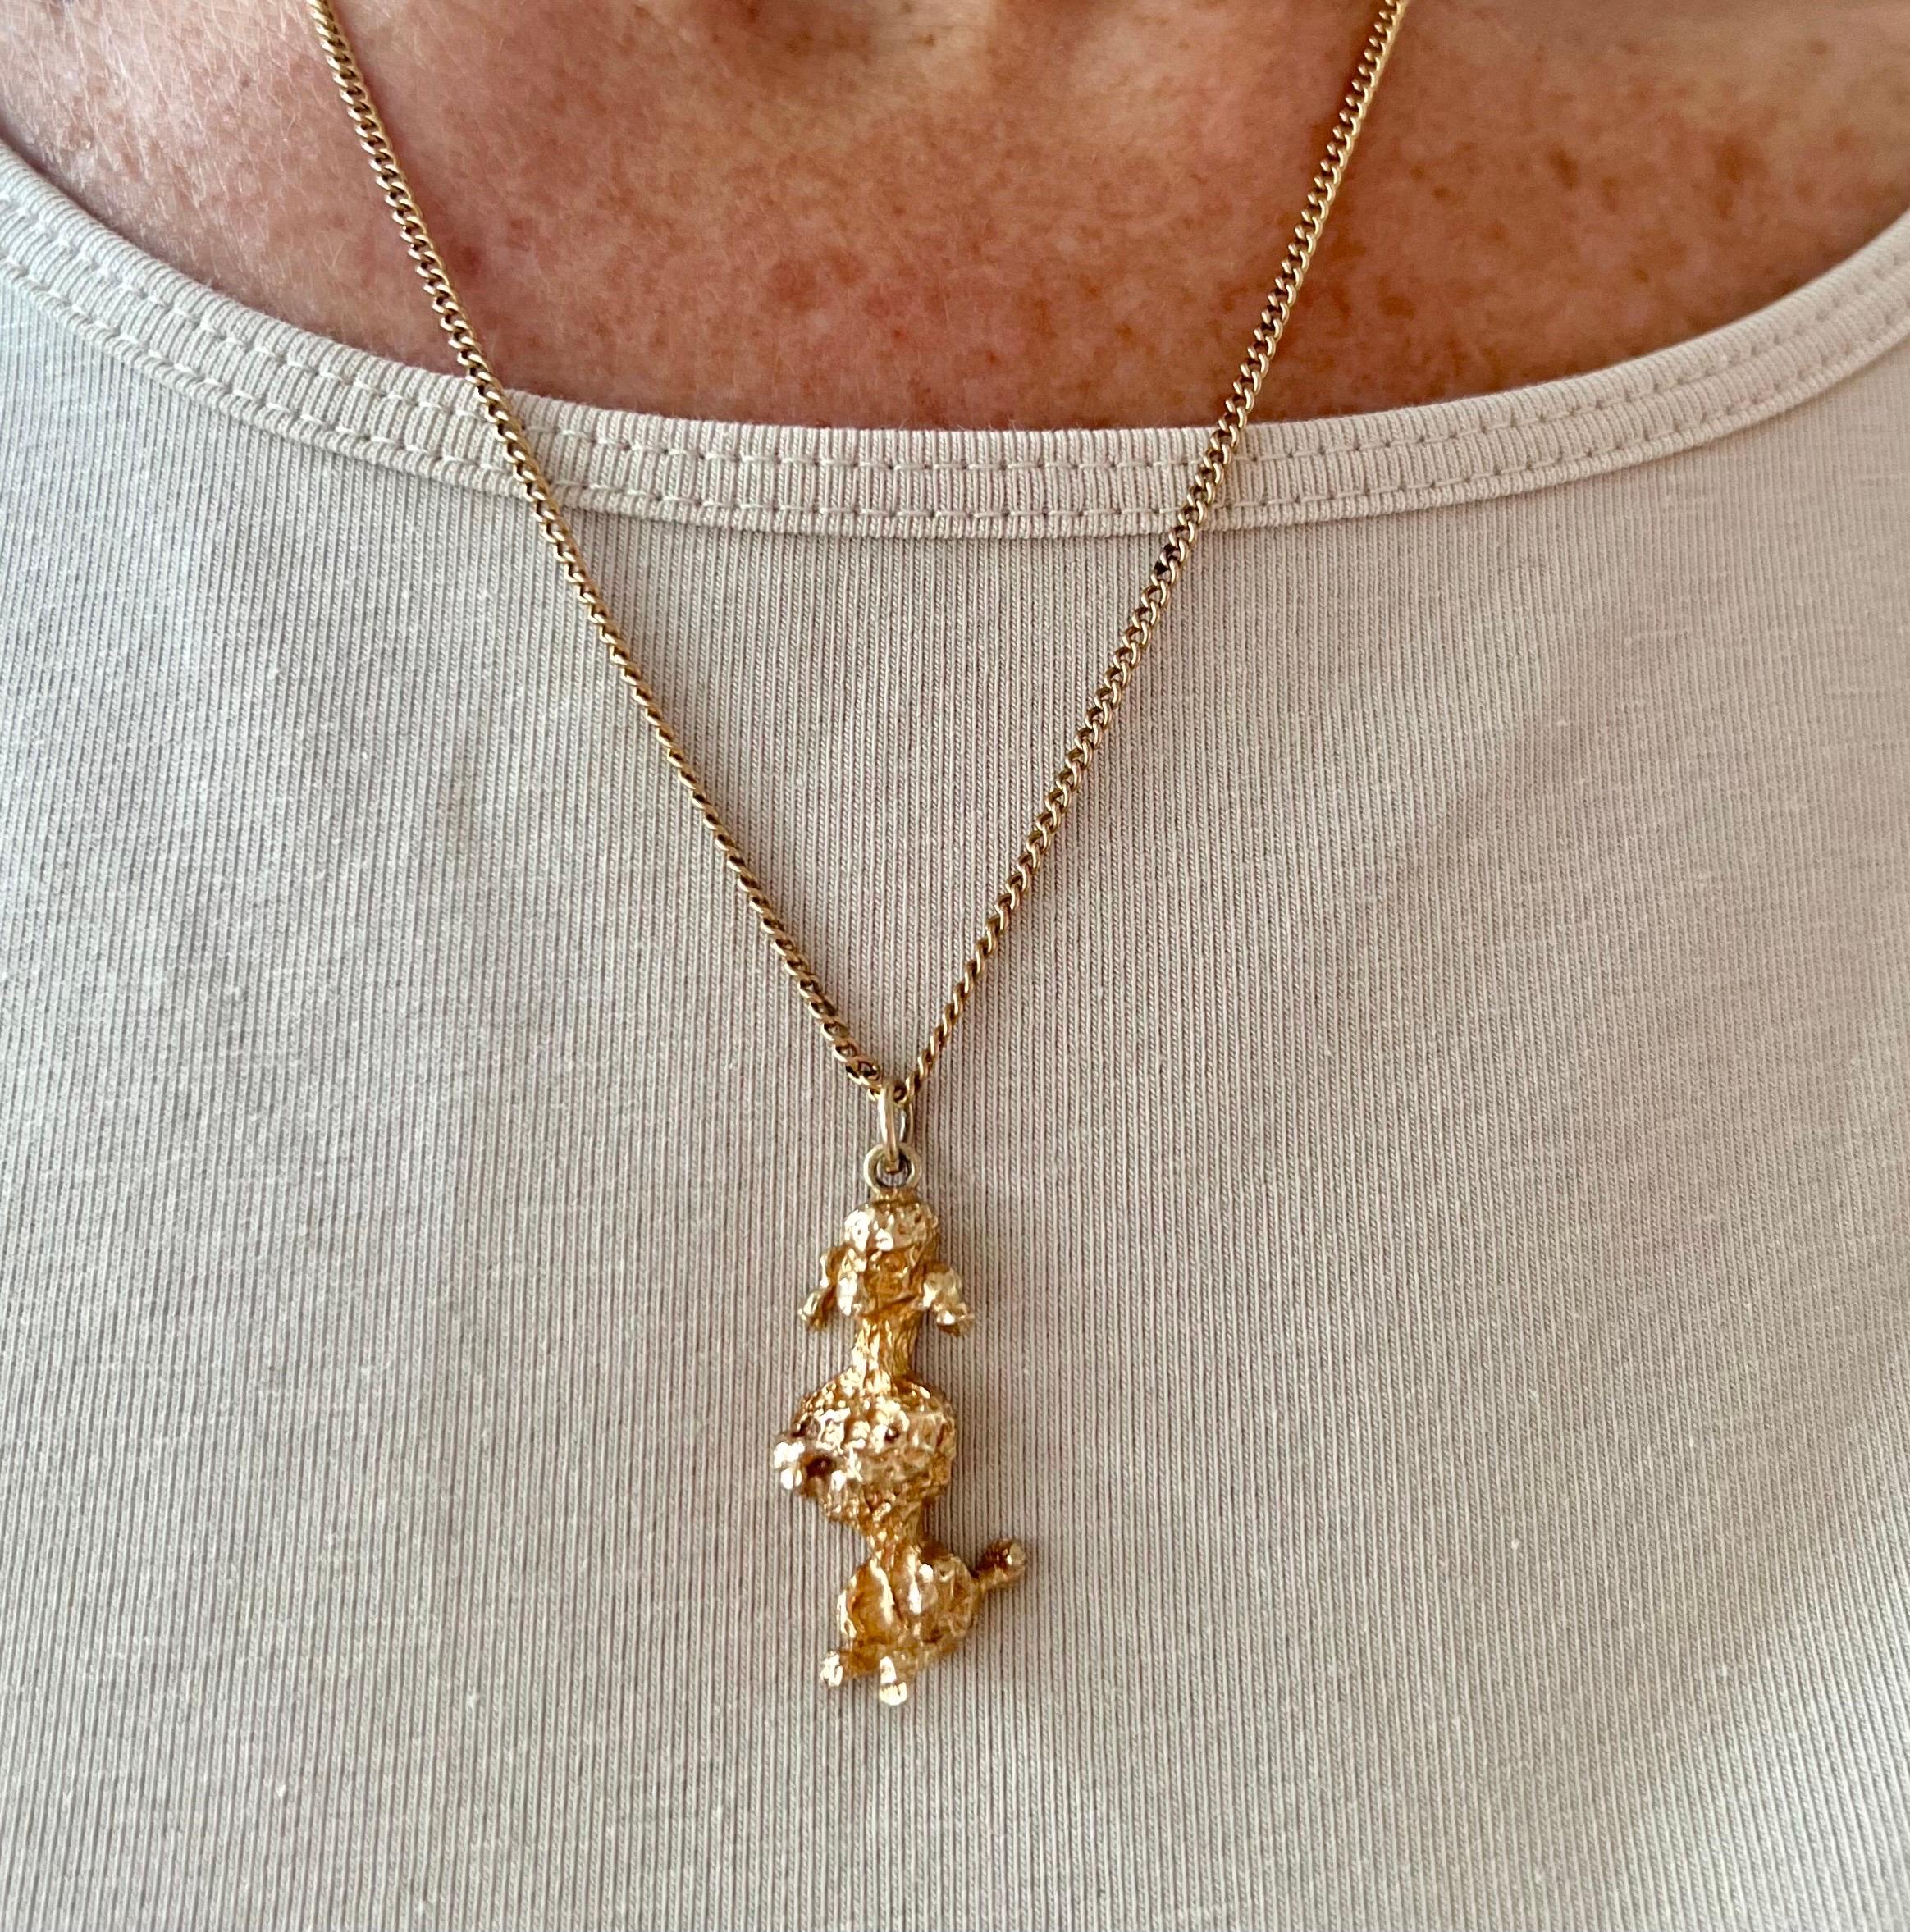 A lovely vintage 9 karat yellow gold poodle dog charm pendant. The always elegant poodle is beautifully detailed with a structured design which reminiscent the curly hair of the dog. 

The poodle dog spirit animal is a symbol of fun and happiness.